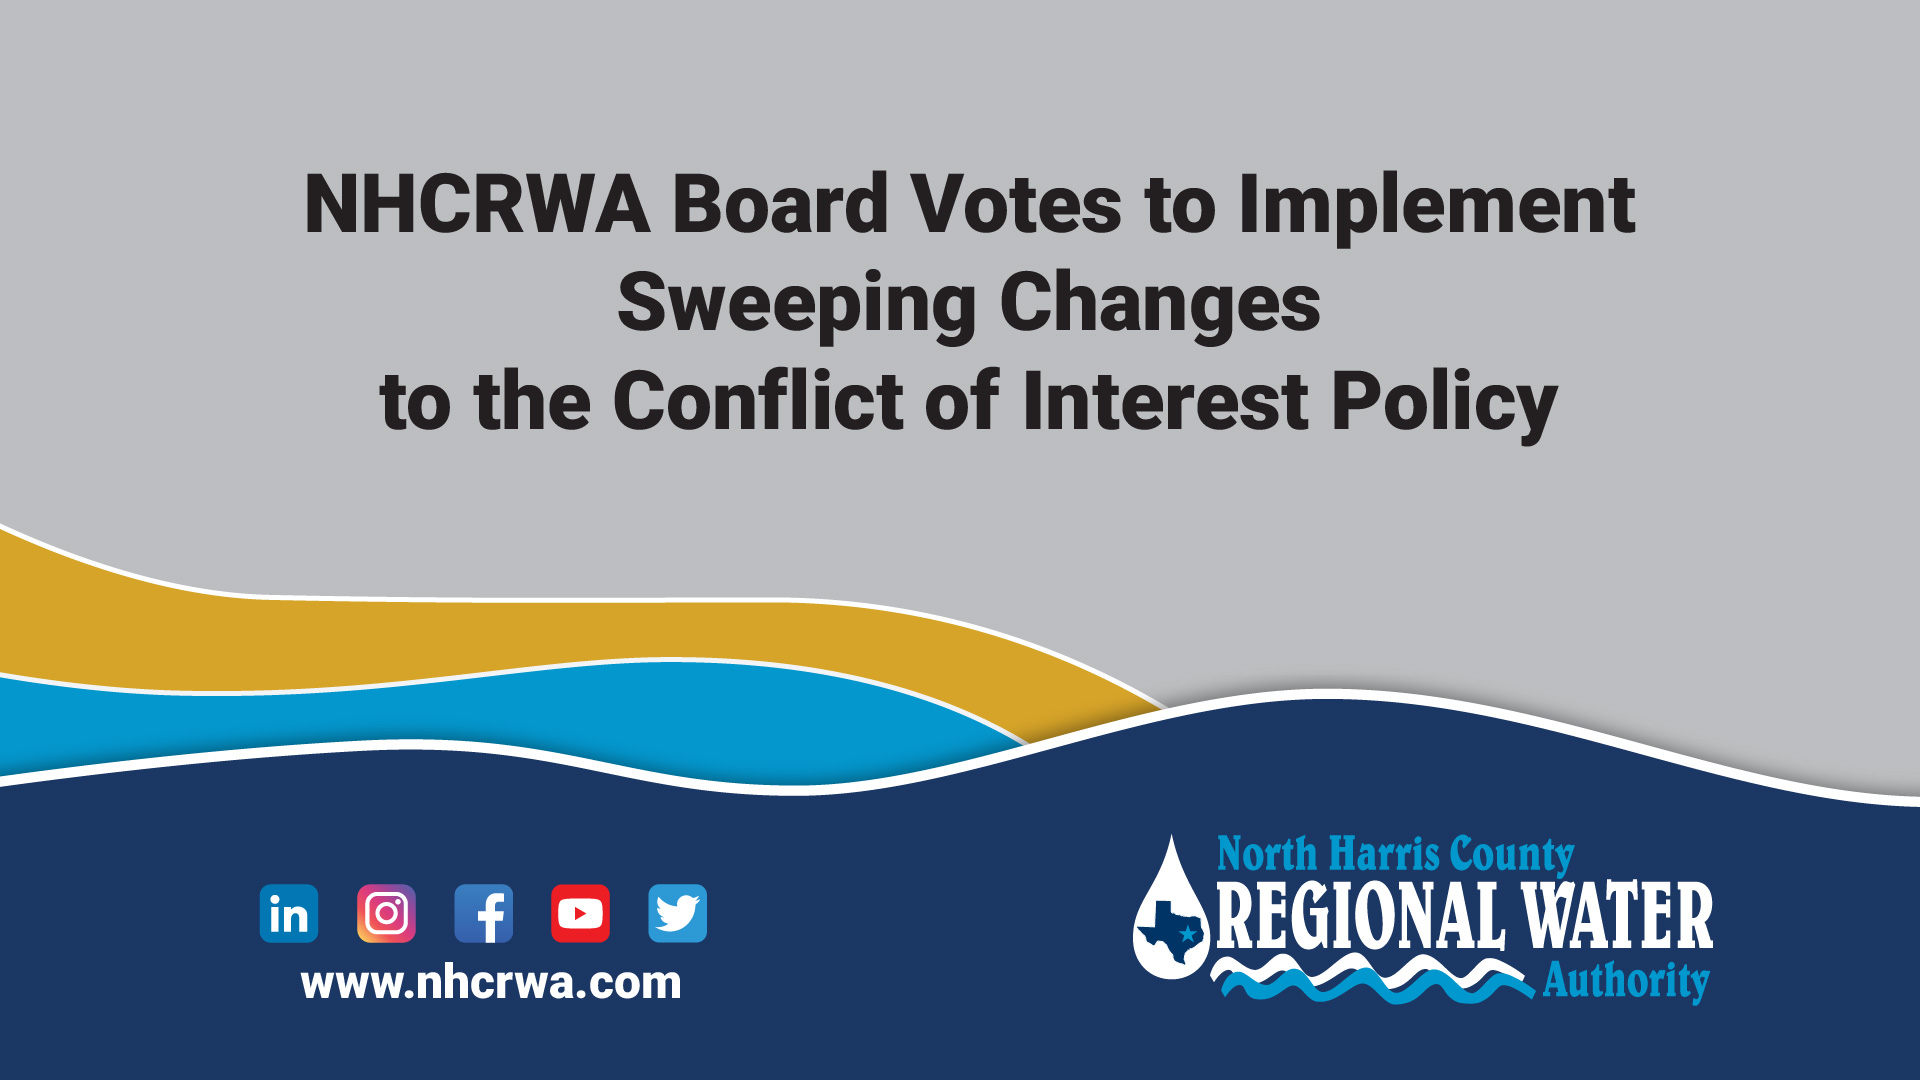 NHCRWA Board Votes to Implement Sweeping Changes to the Conflict of Interest Policy